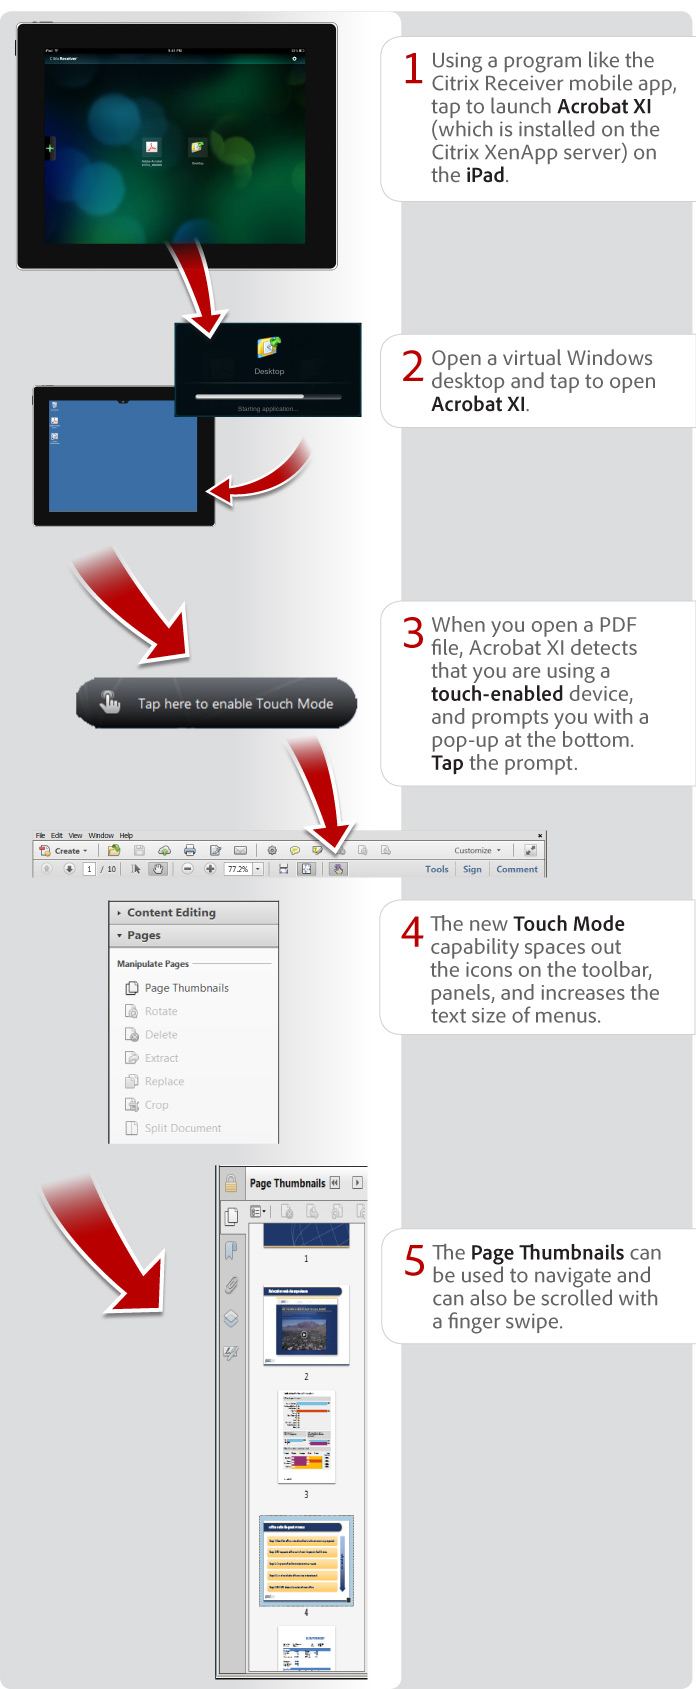 How to use Acrobat XI on touch devices